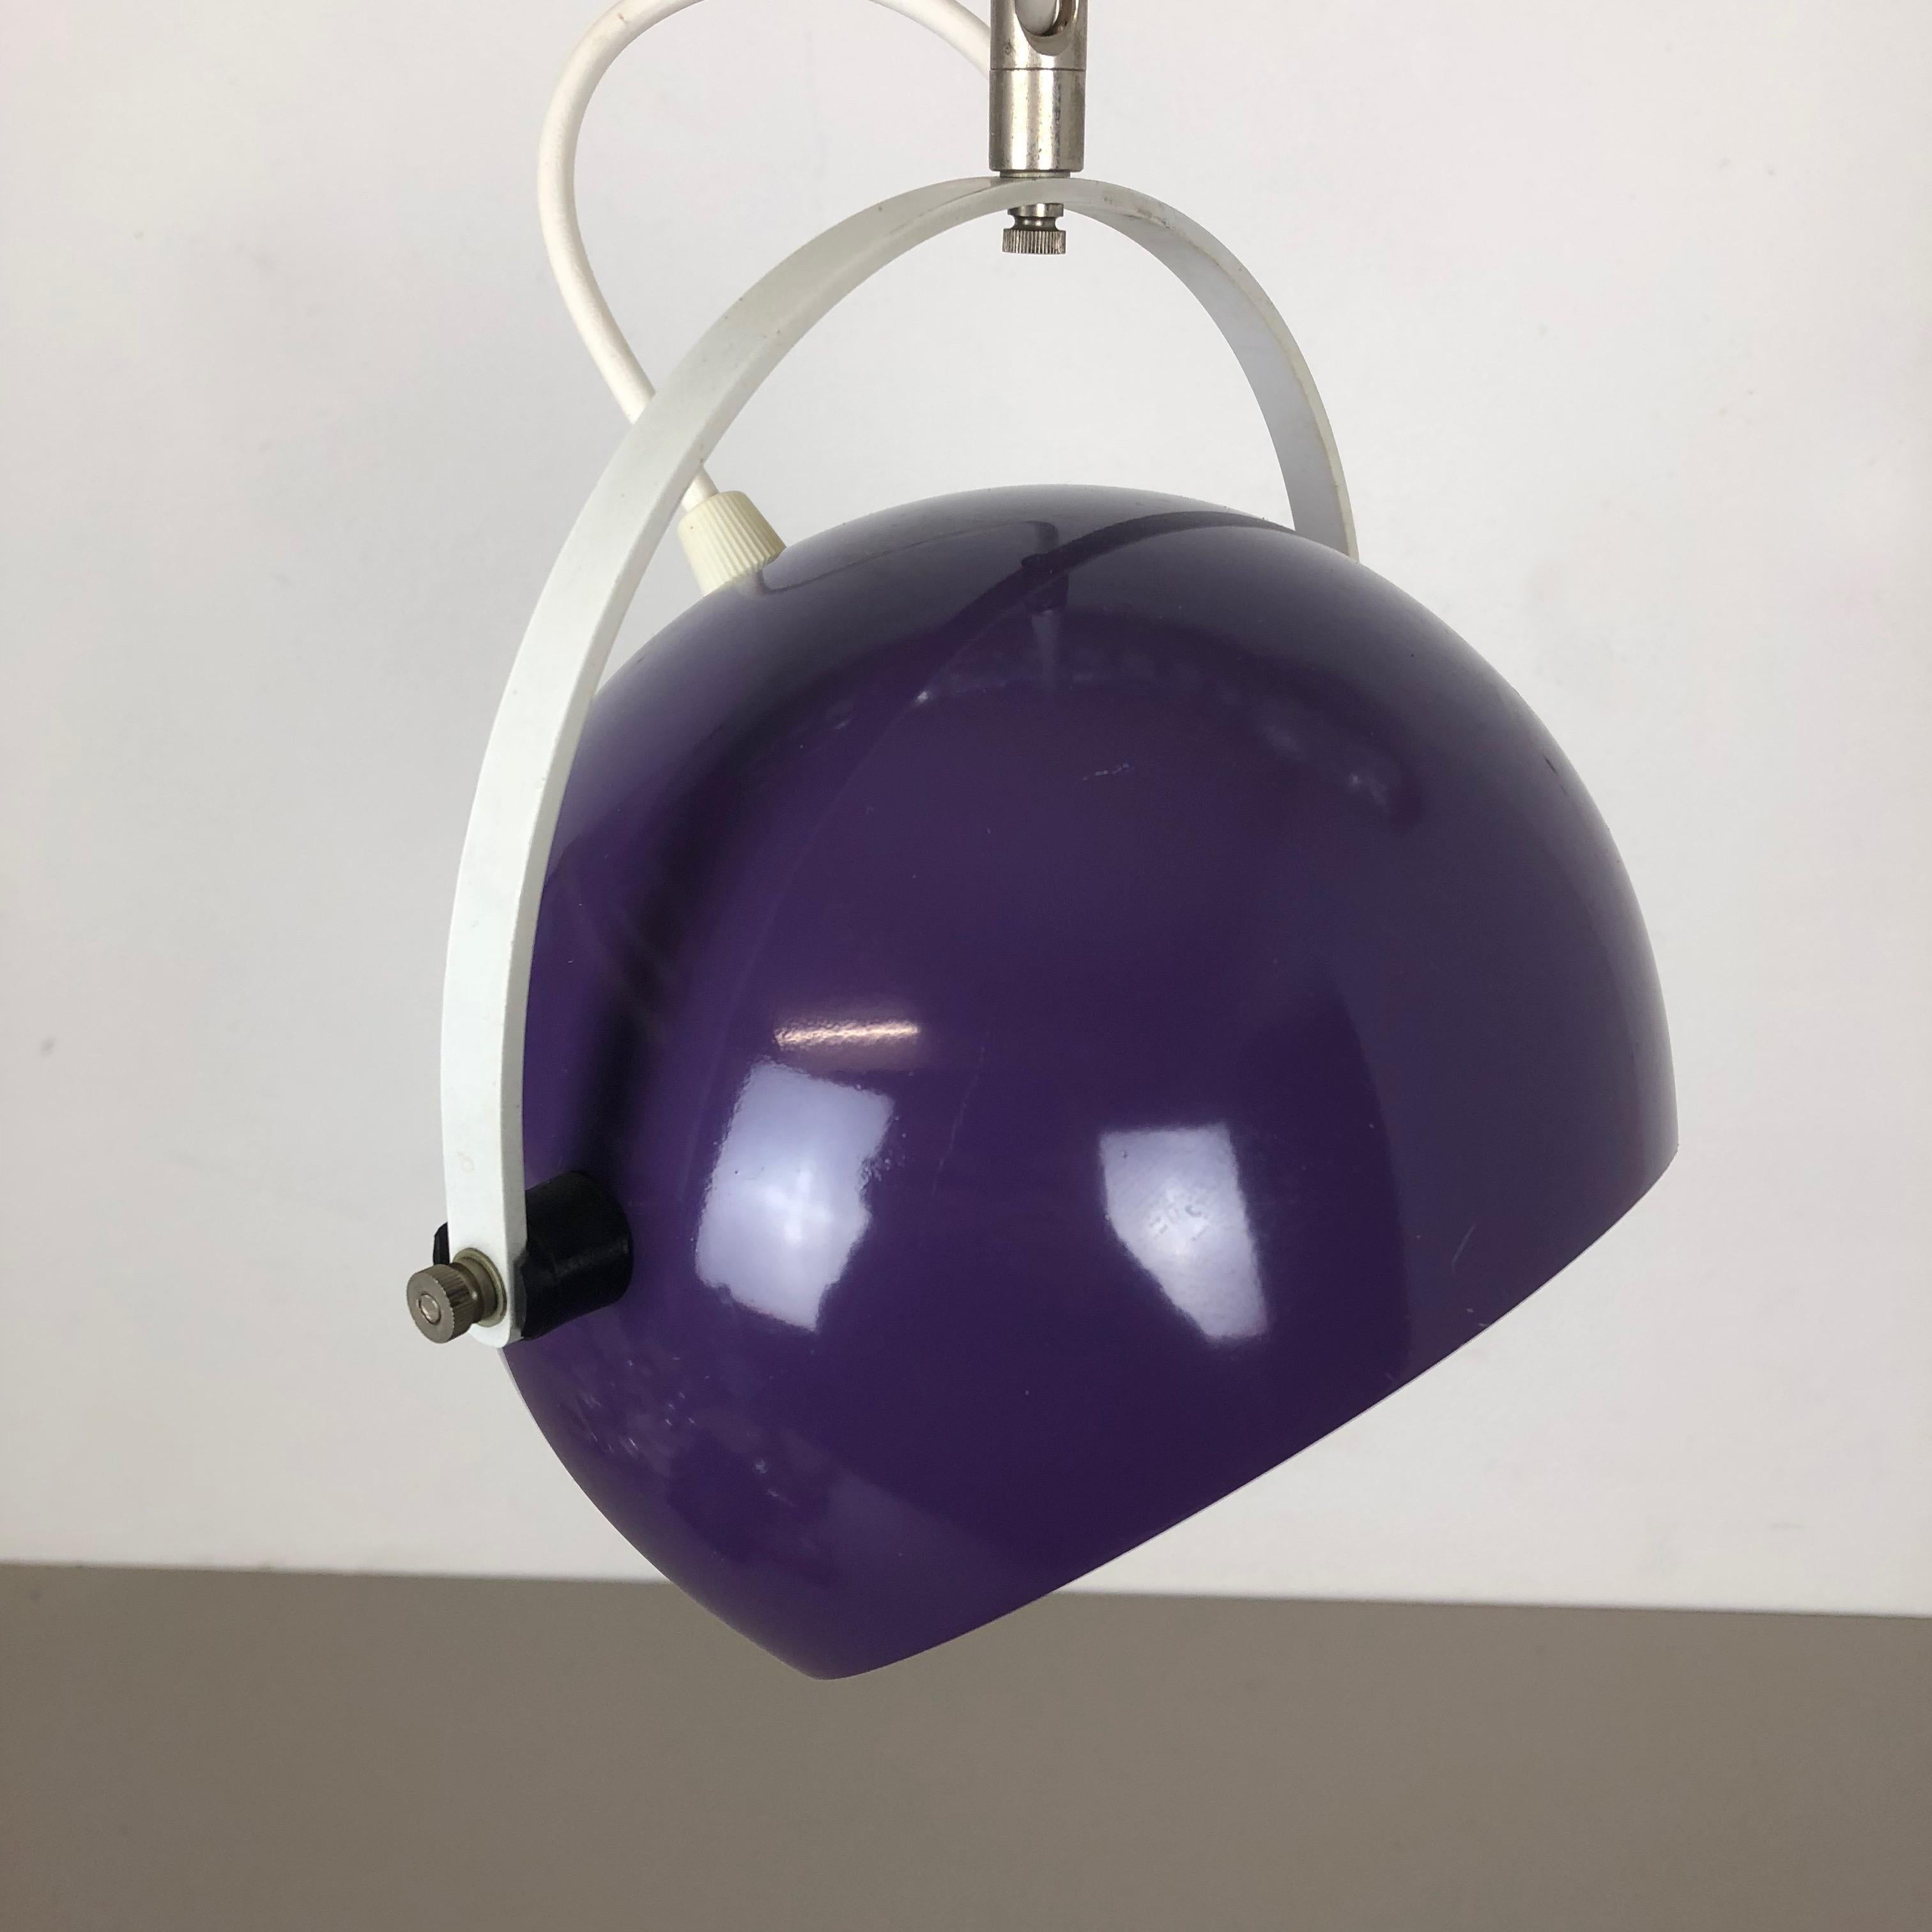 20th Century Adjustable Pop Art Panton Style Hanging Light with Purple Spot, Germany, 1970s For Sale